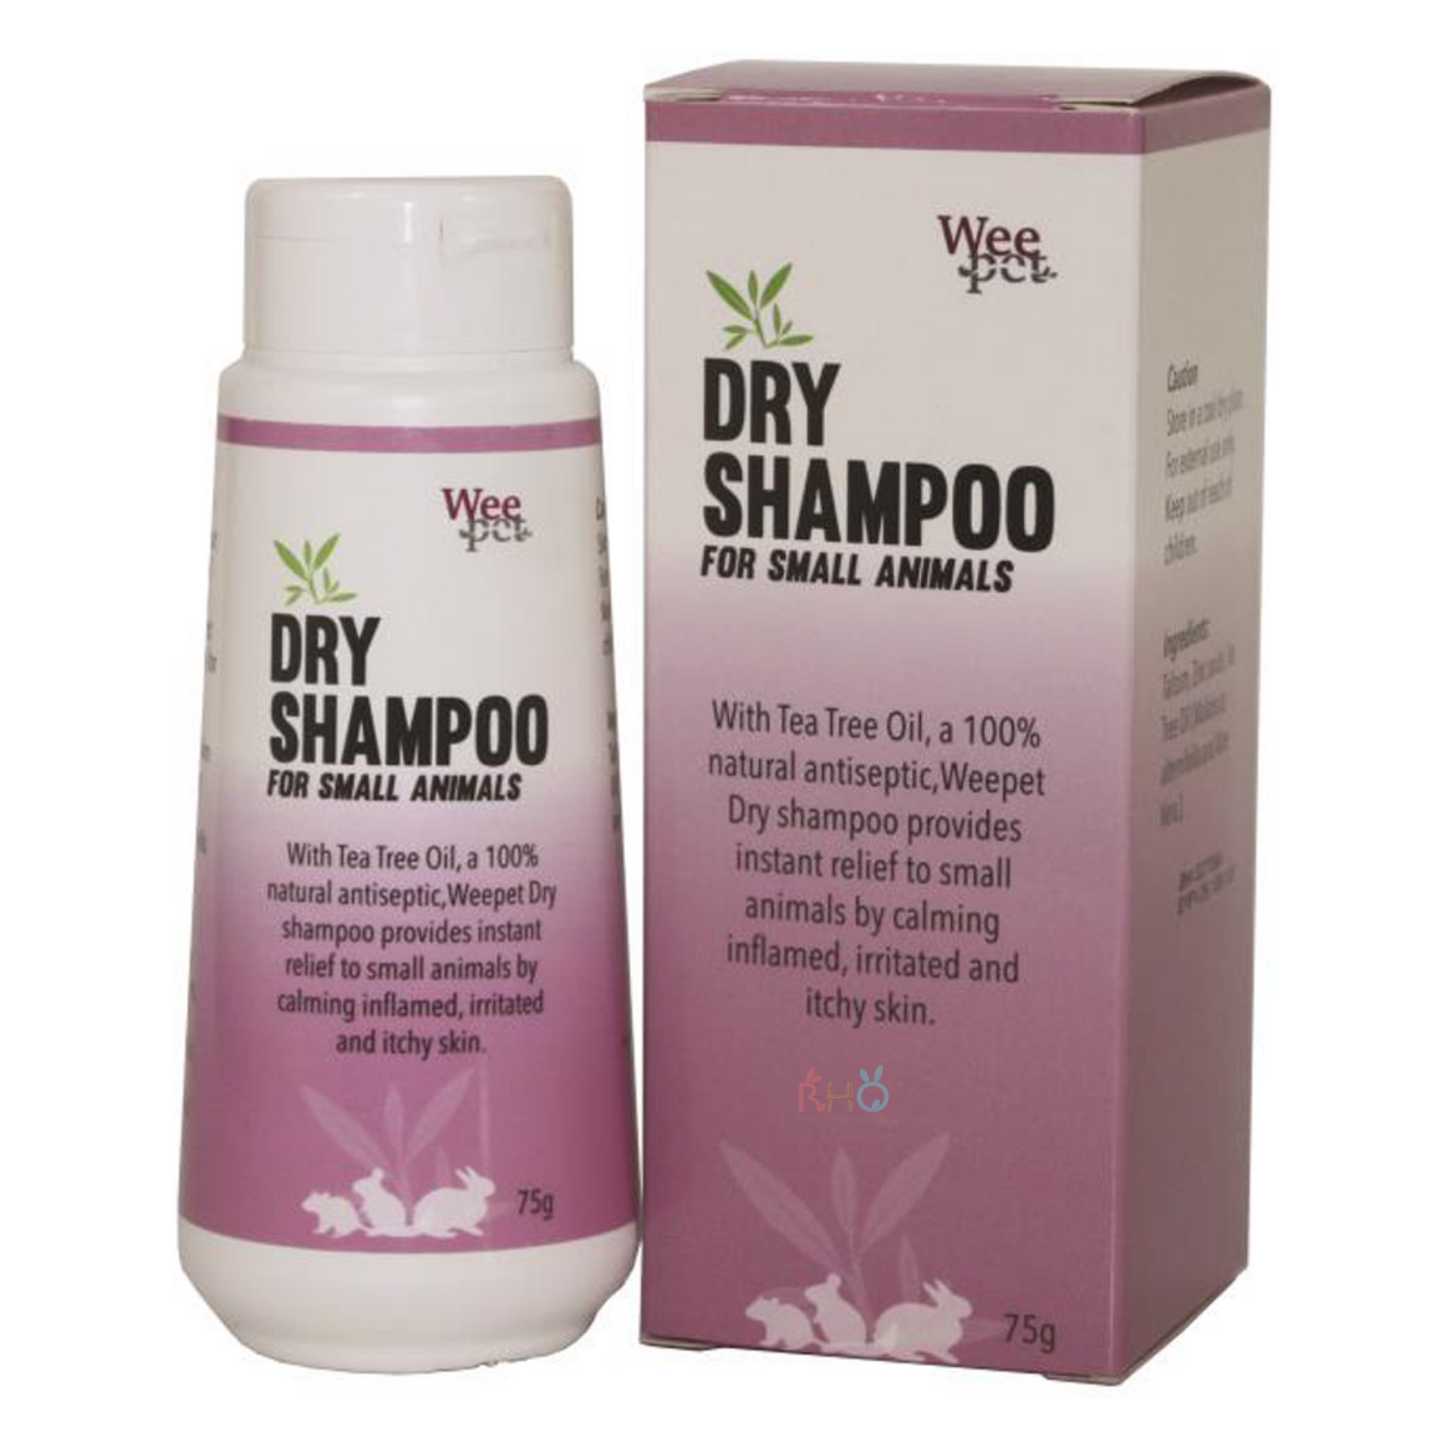 Weepet Dry Shampoo 75g